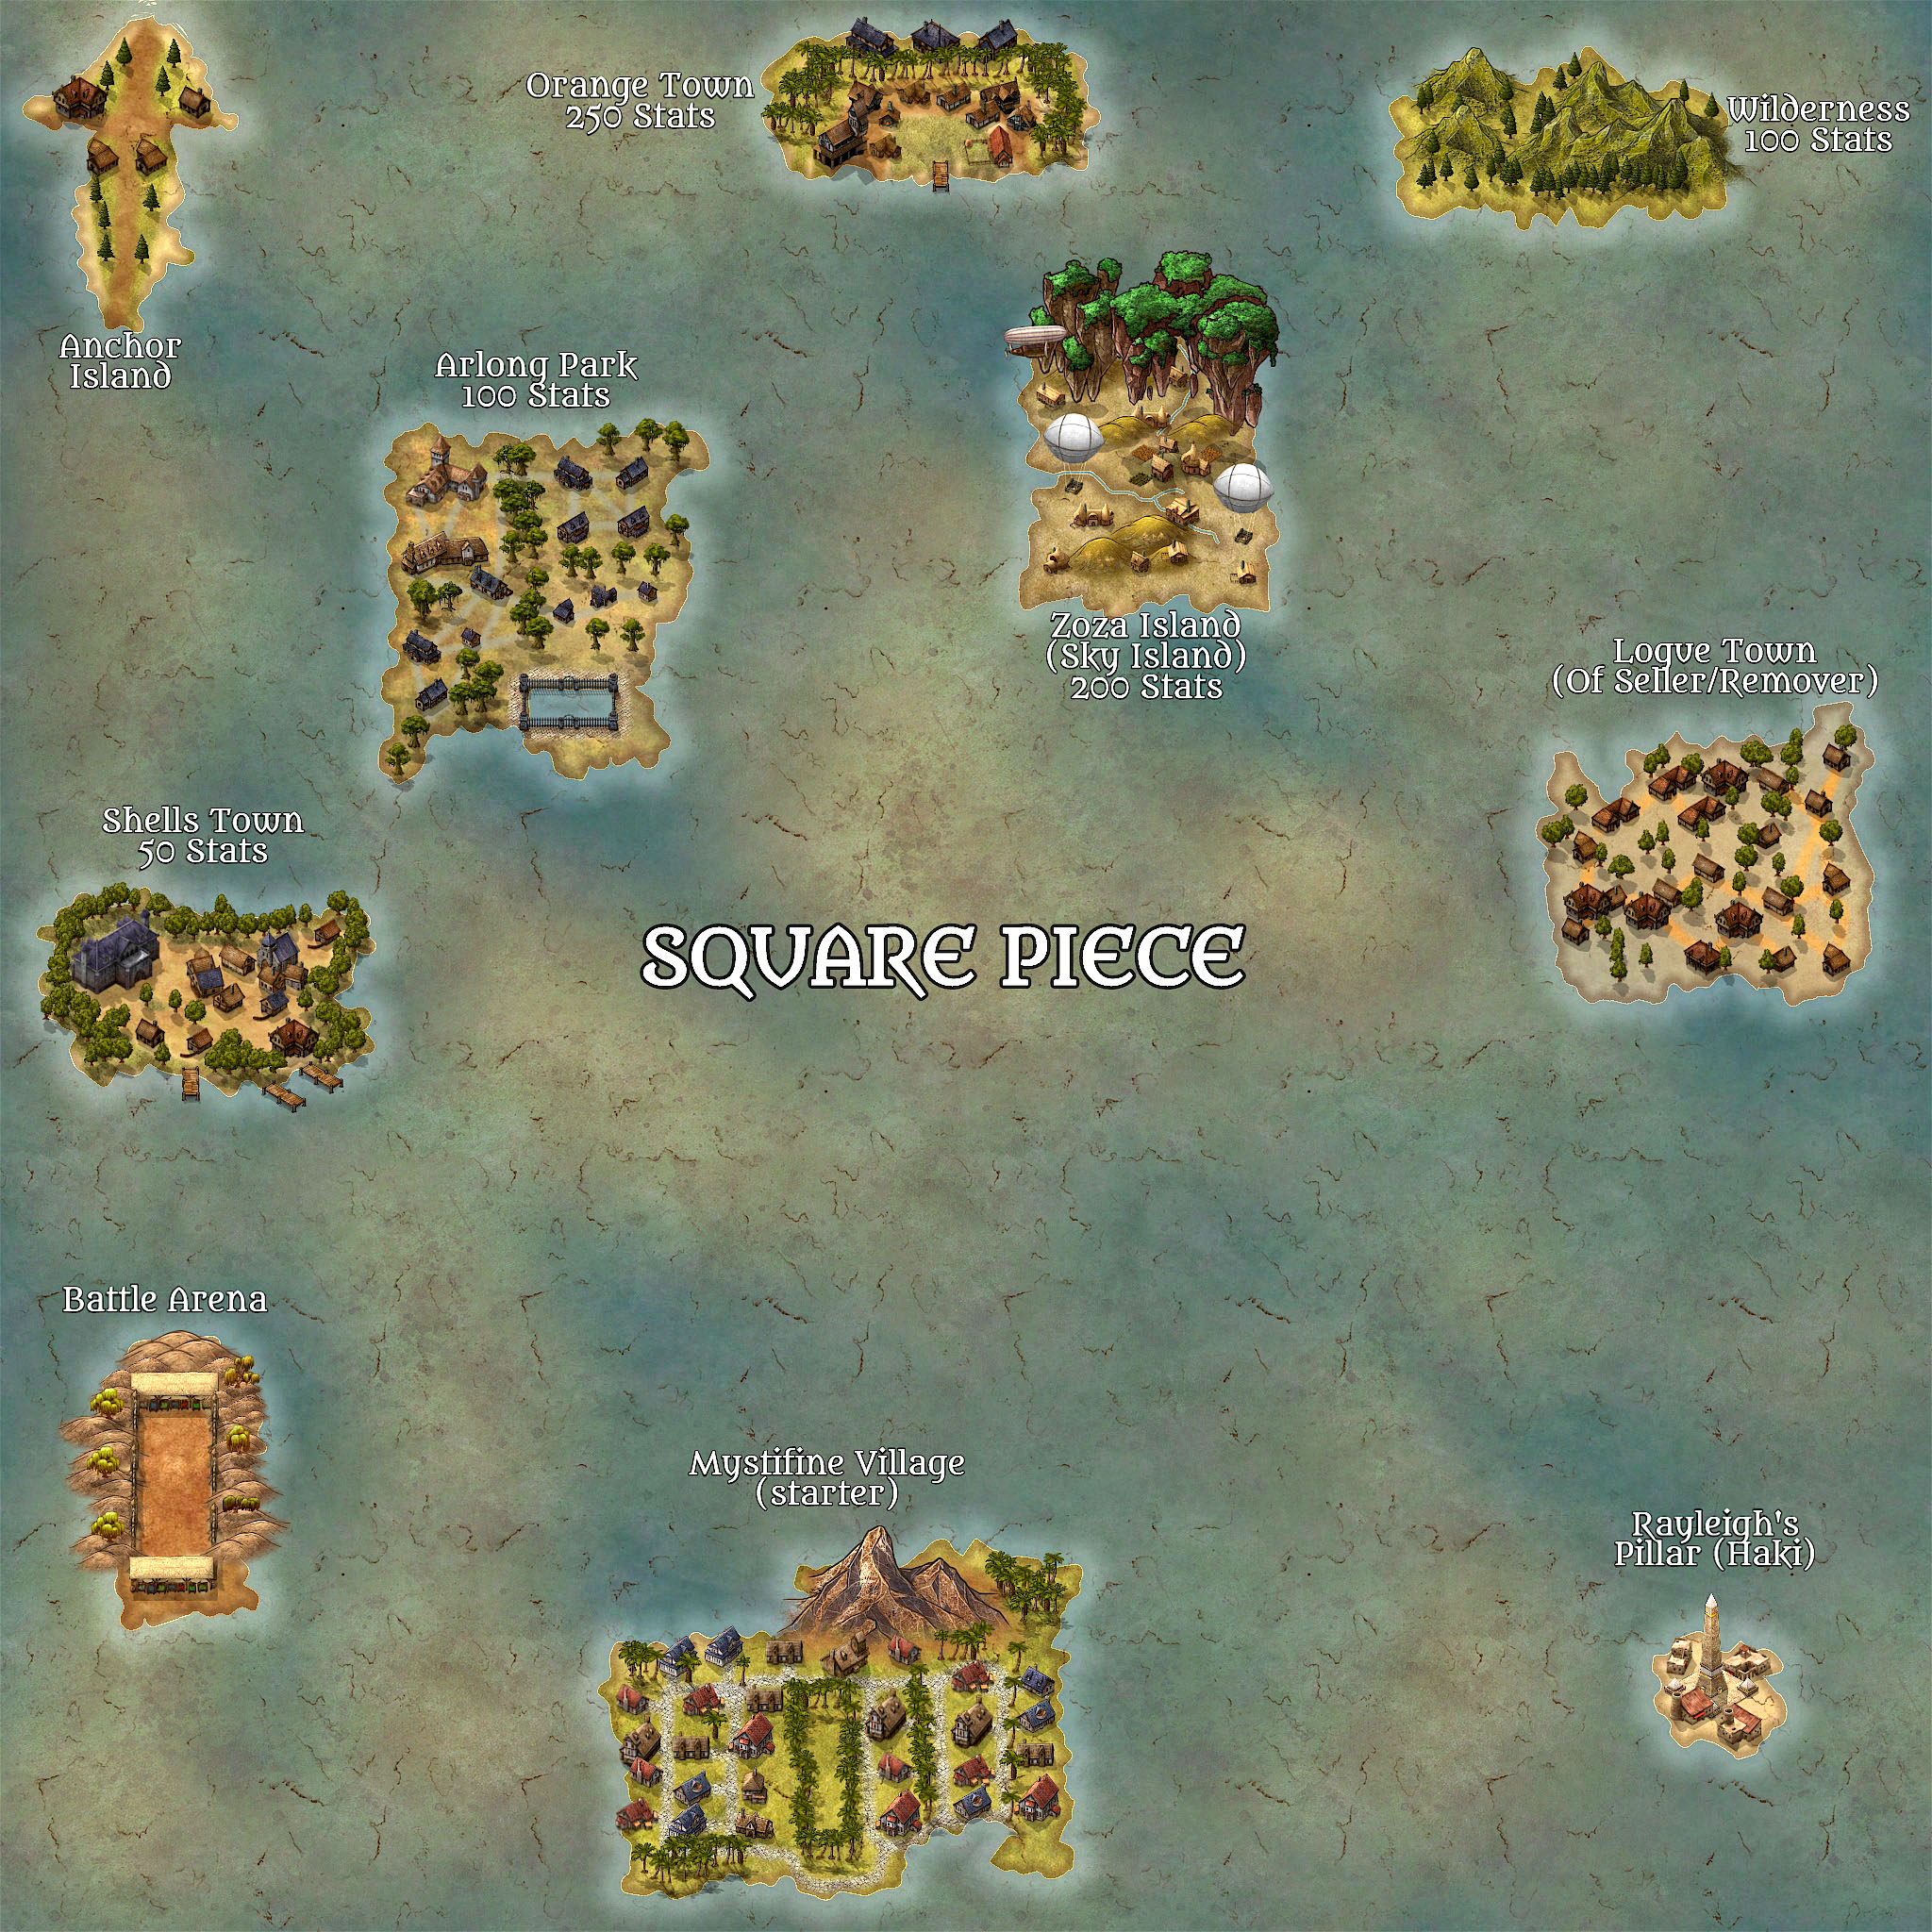 Where to Find Logue Town (New Island)